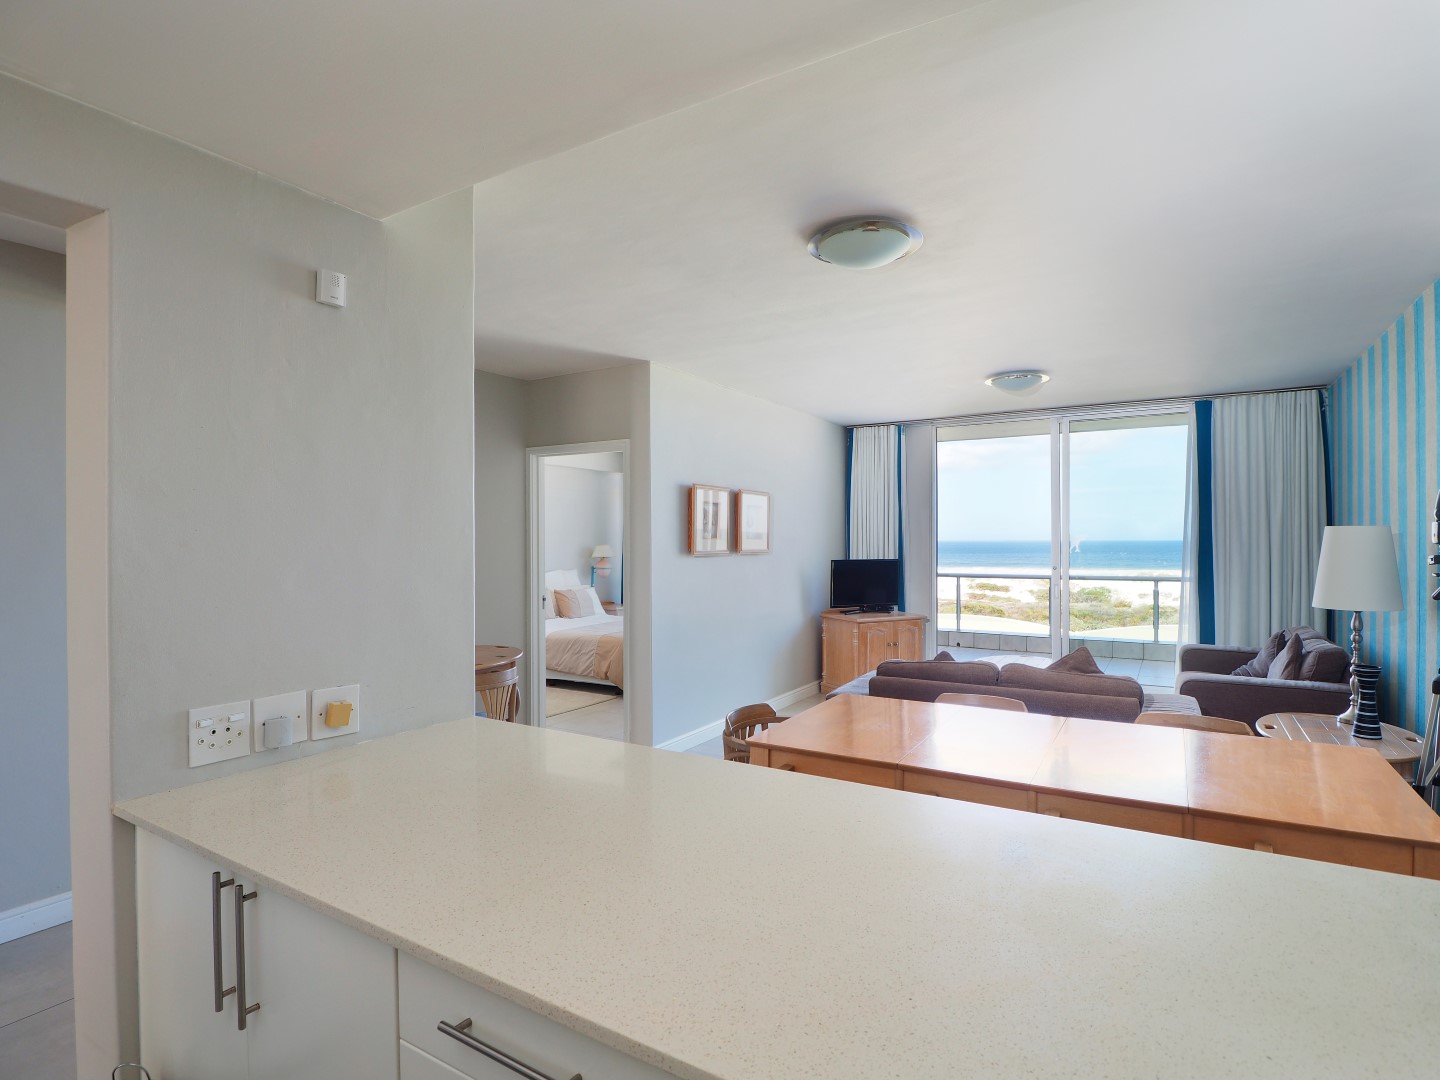 Photo 14 of Dolphin Beach Beauty accommodation in Bloubergstrand, Cape Town with 3 bedrooms and 2 bathrooms